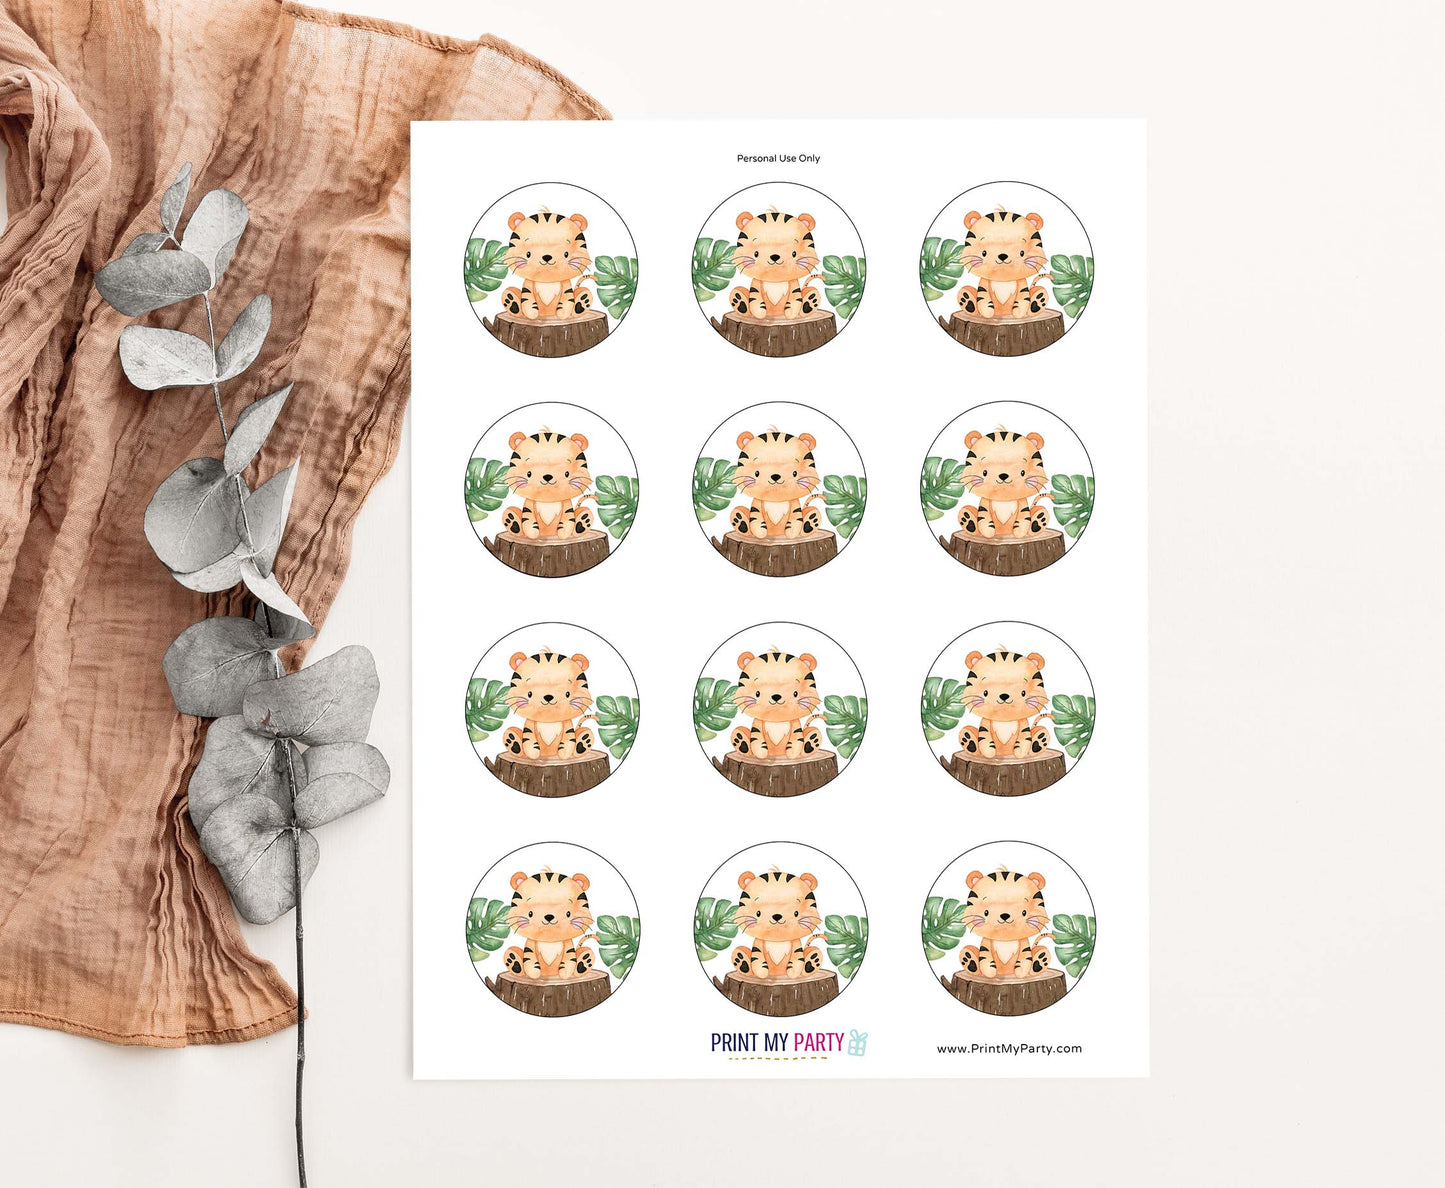 Tiger Cupcake Toppers | Safari Themed Party Decorations - 35E